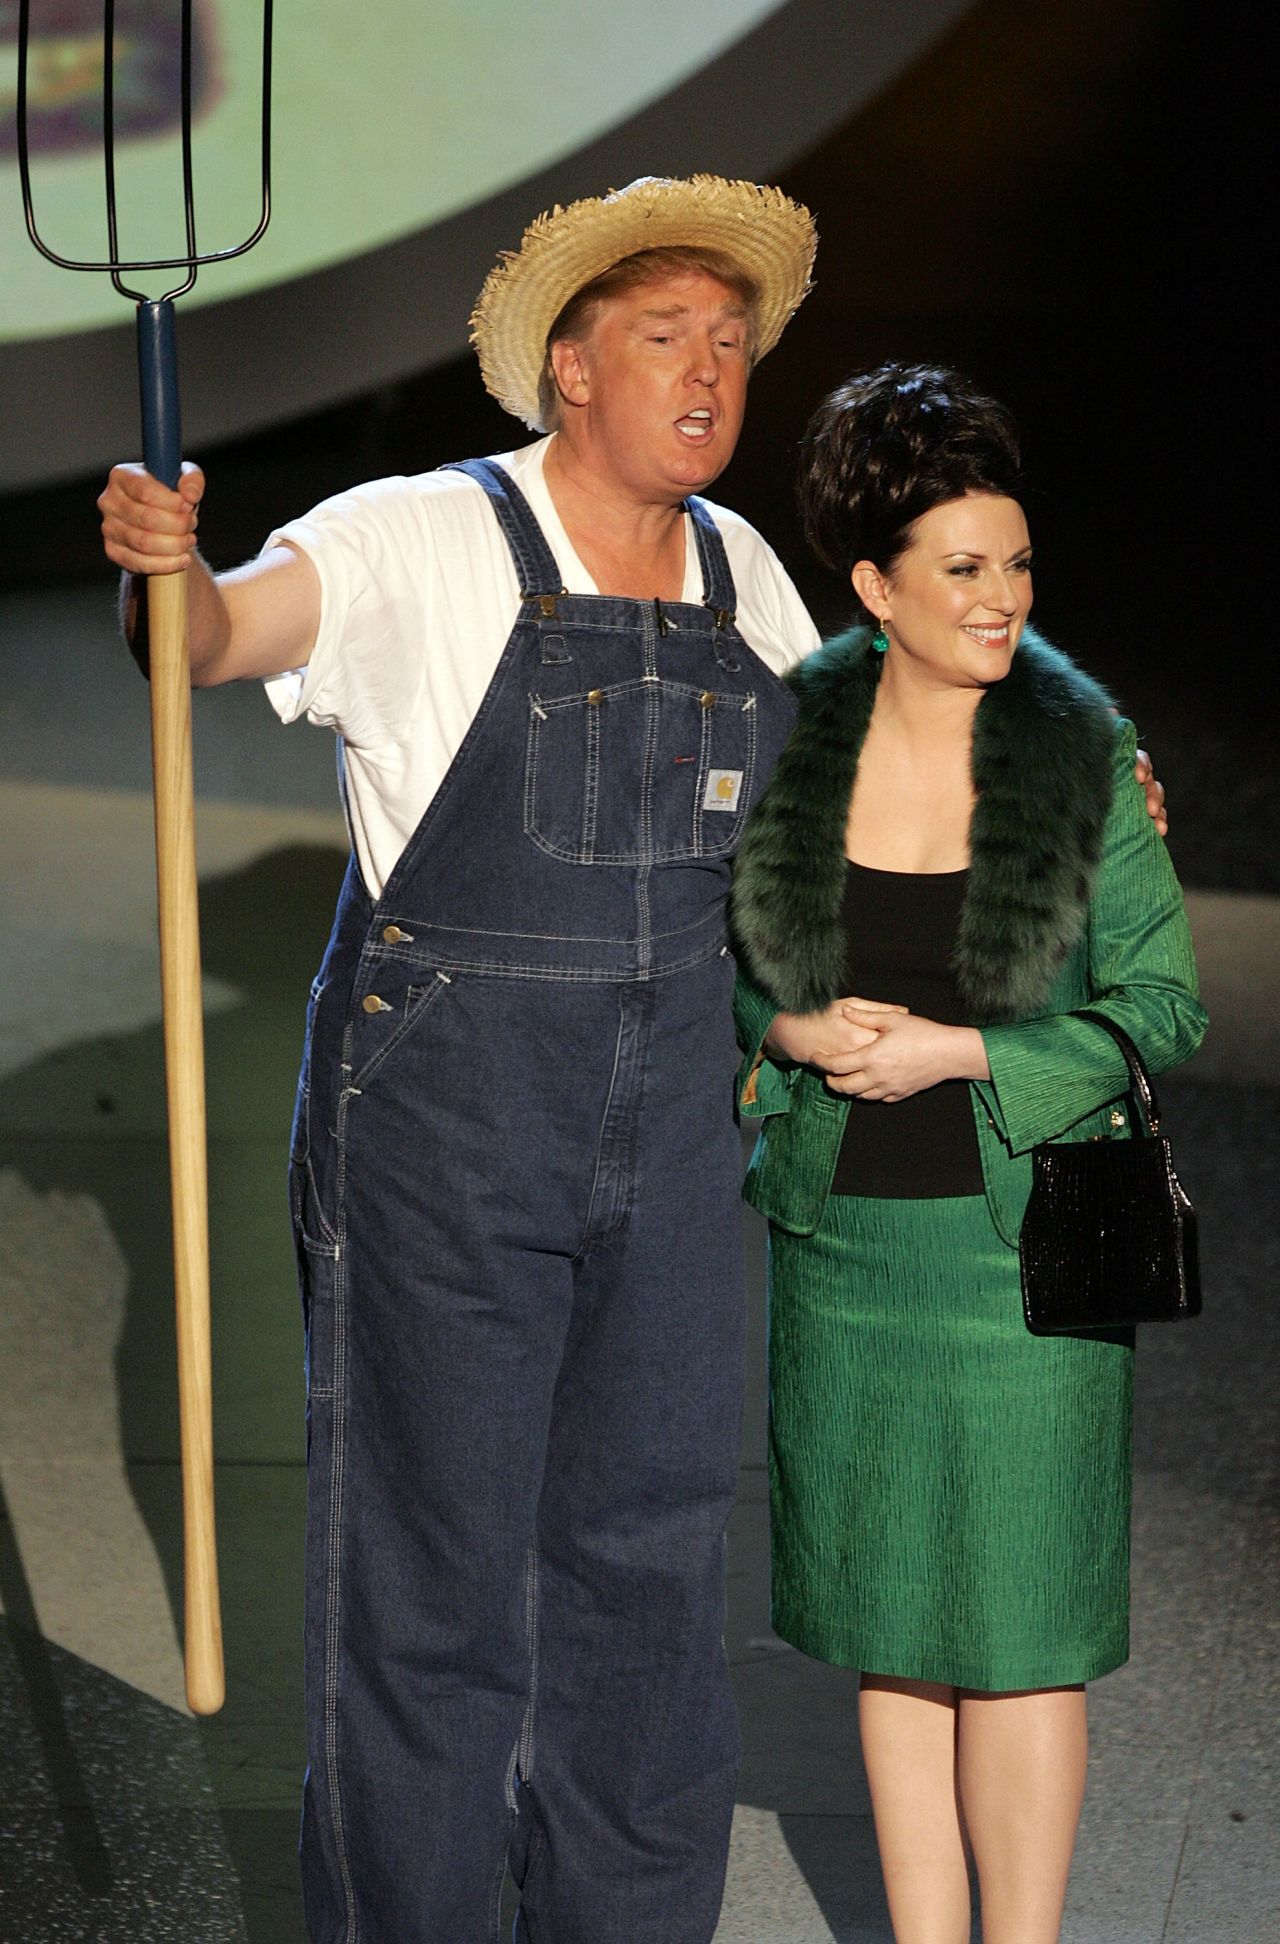 Trump and Actress Megan Mullally perform the Green Acres Theme onstage at the 57th Annual Emmy Awards in 2005 in Los Angeles, California.